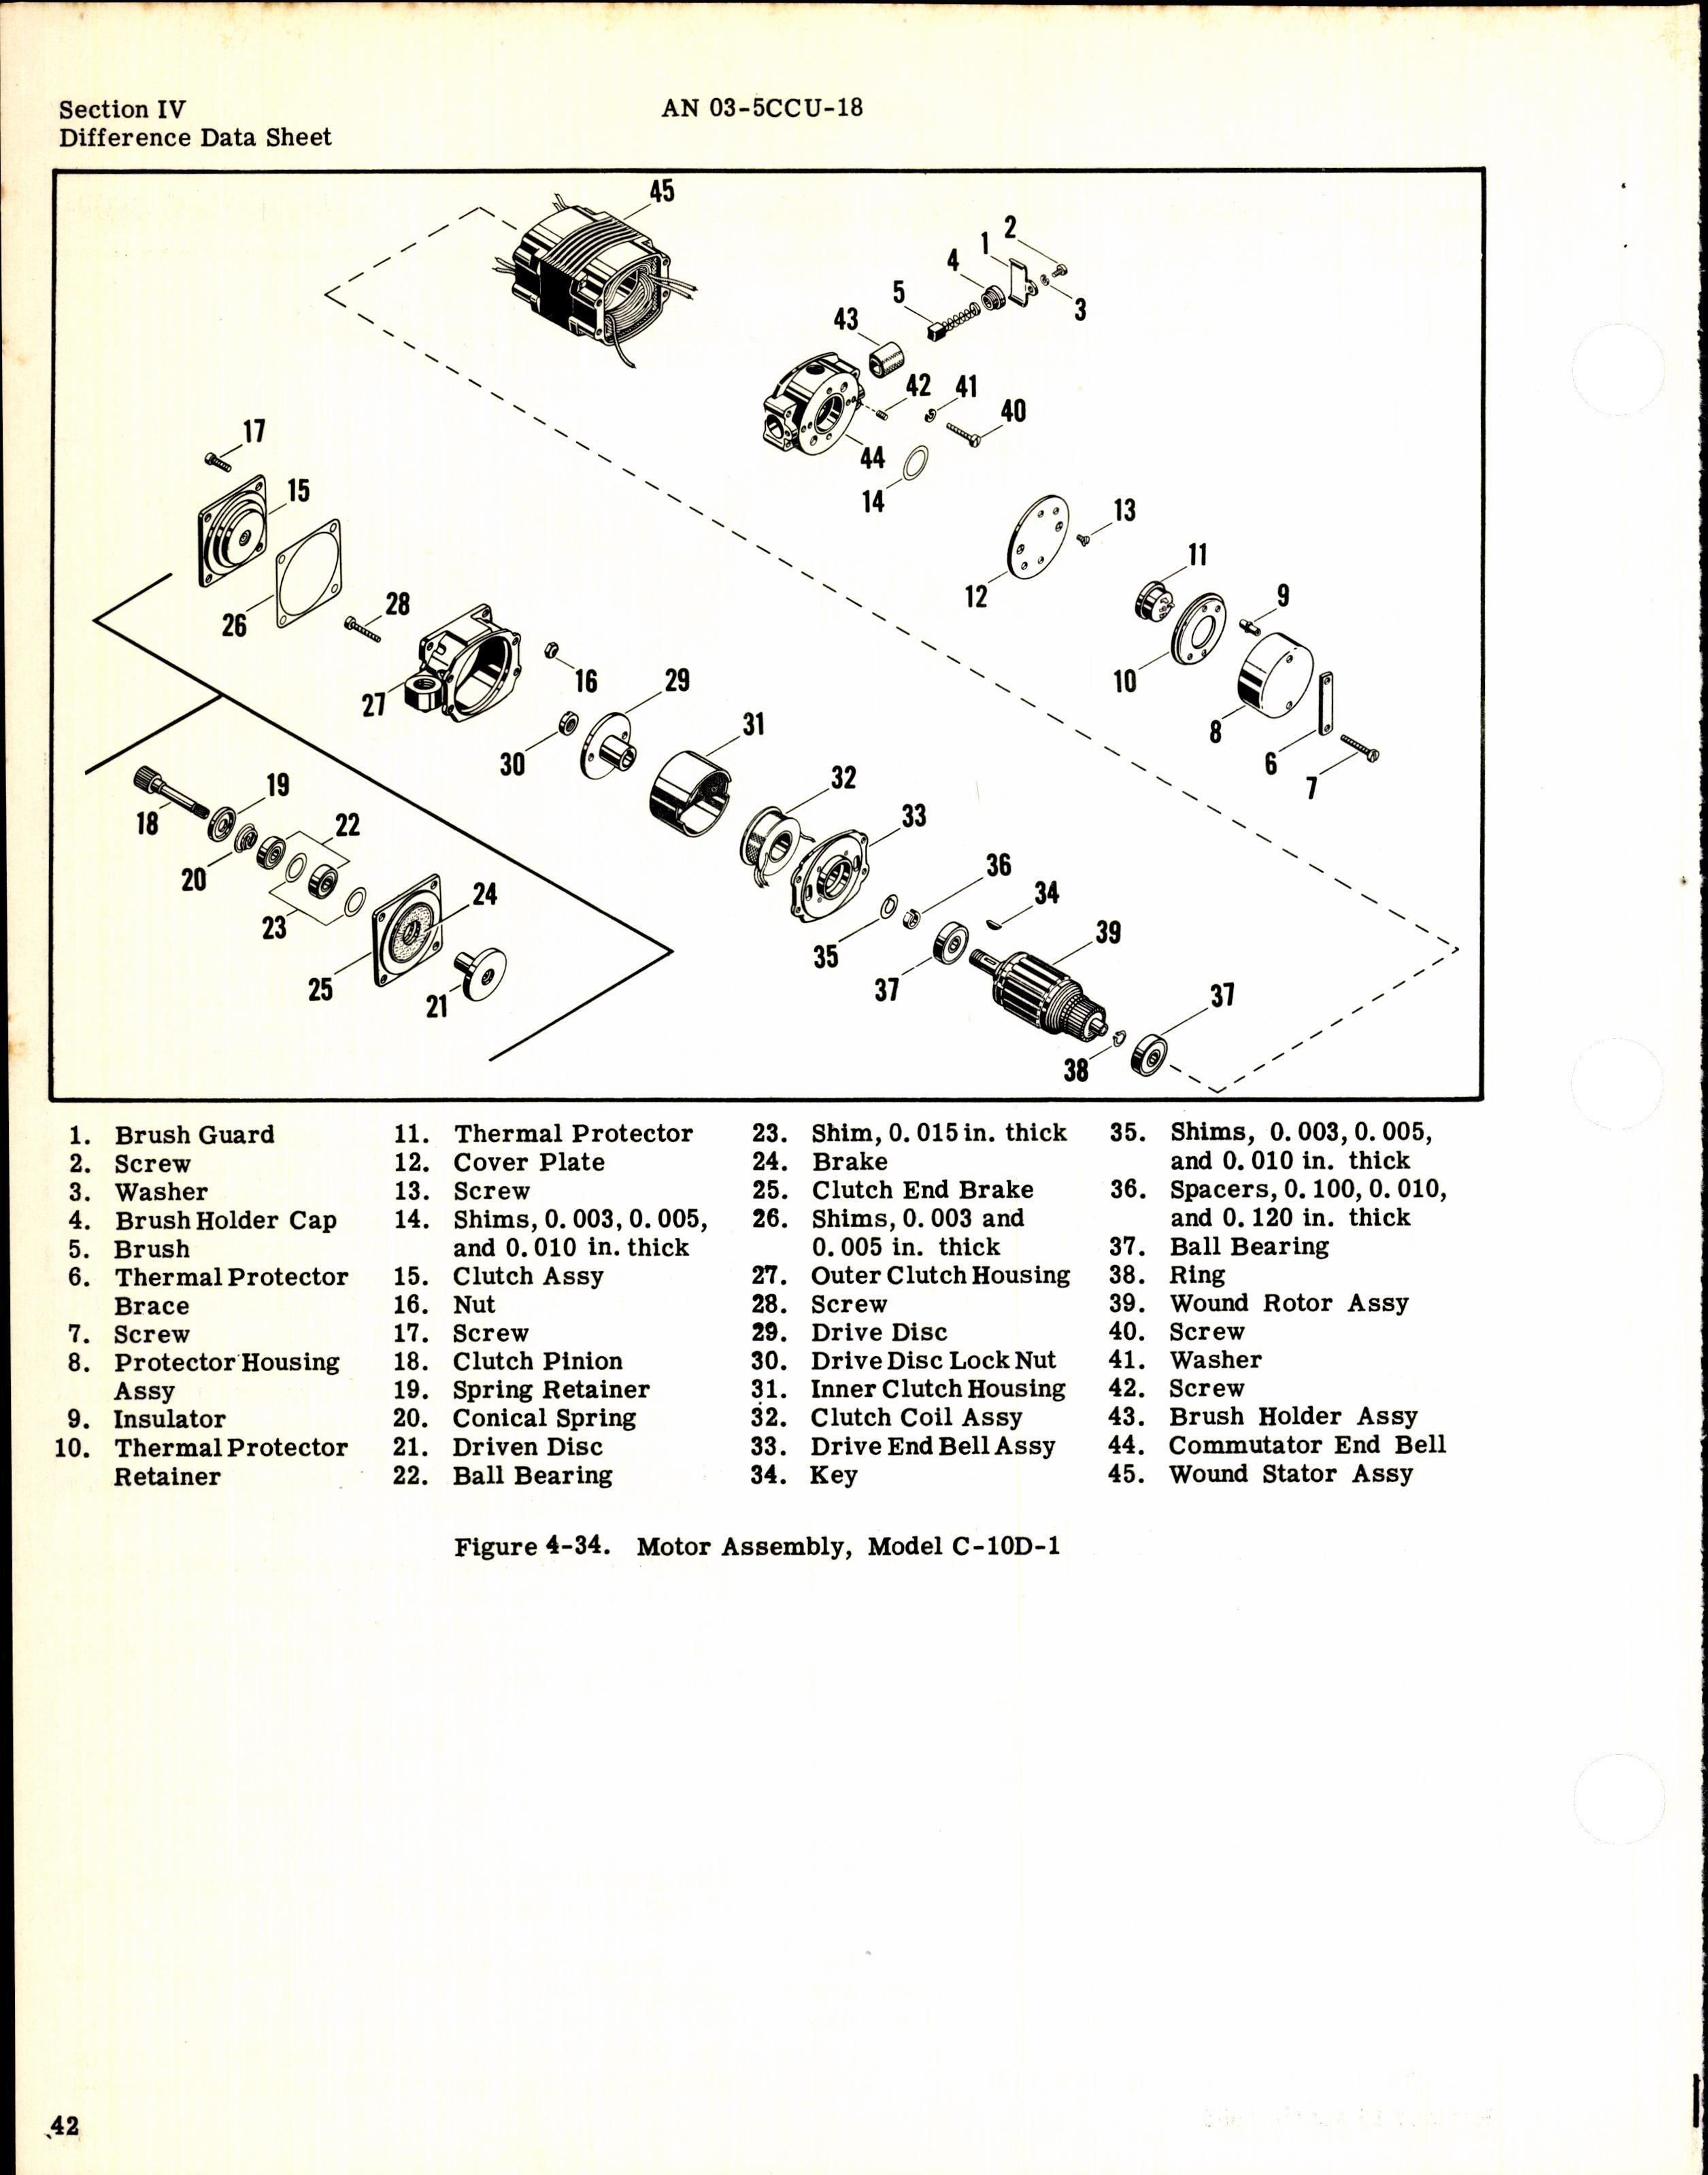 Sample page 6 from AirCorps Library document: Overhaul Instructions for Lear 